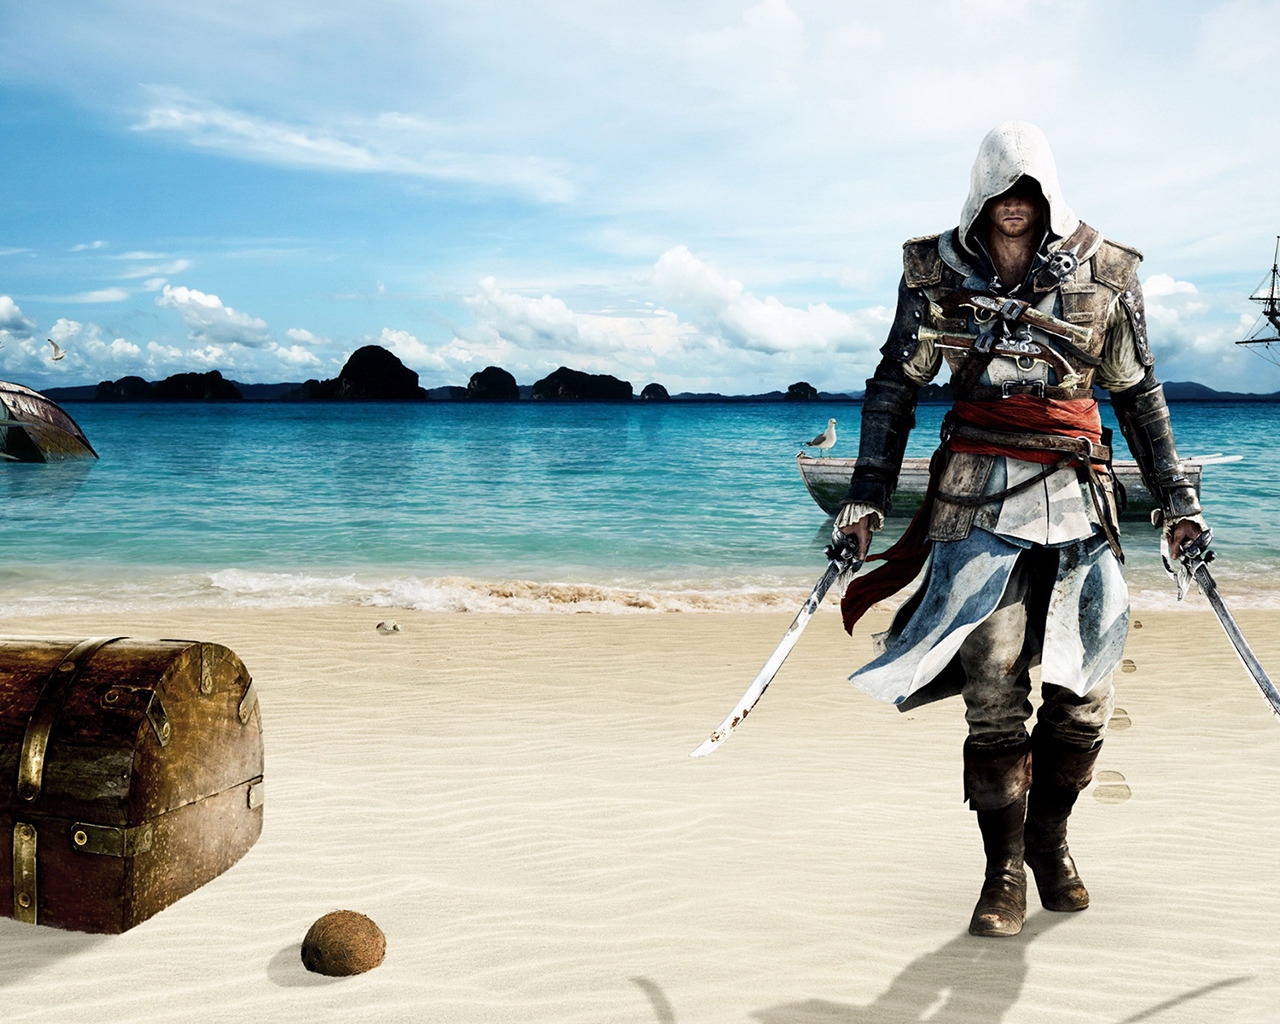 Assassin Creed 4 Beach for 1280 x 1024 resolution